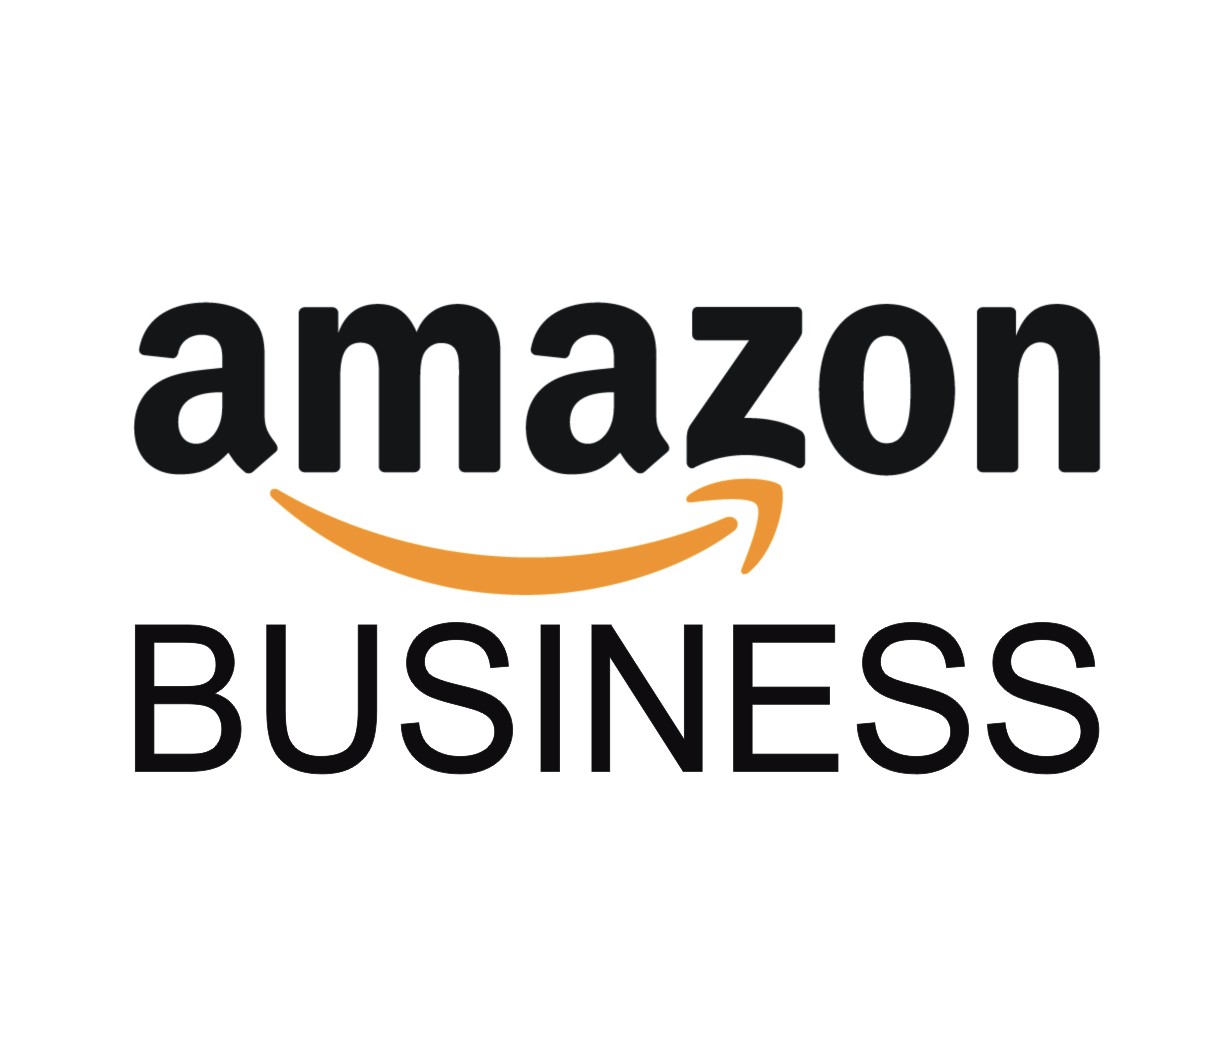 Is Amazon a Business?